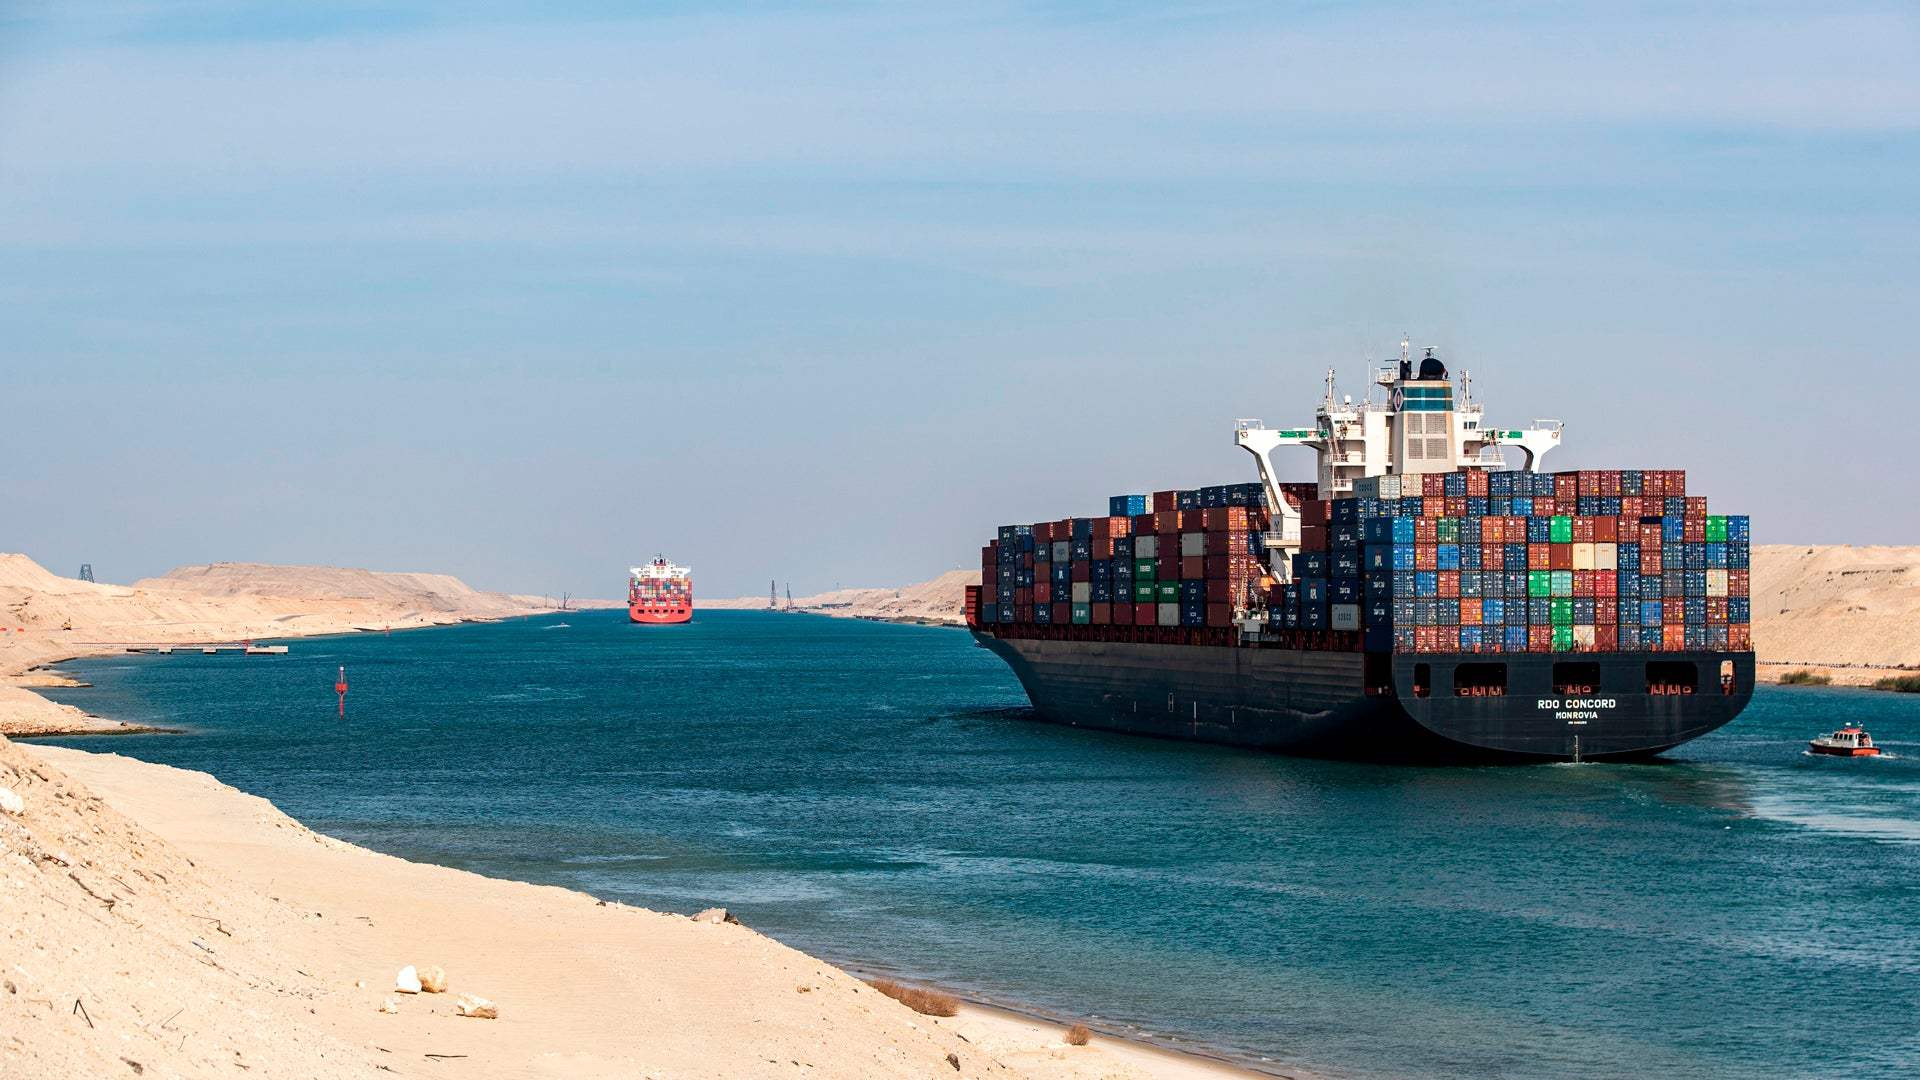 Red Sea attacks&#39; impact on Suez Canal revenue can be partly absorbed, says Egypt&#39;s finance minister